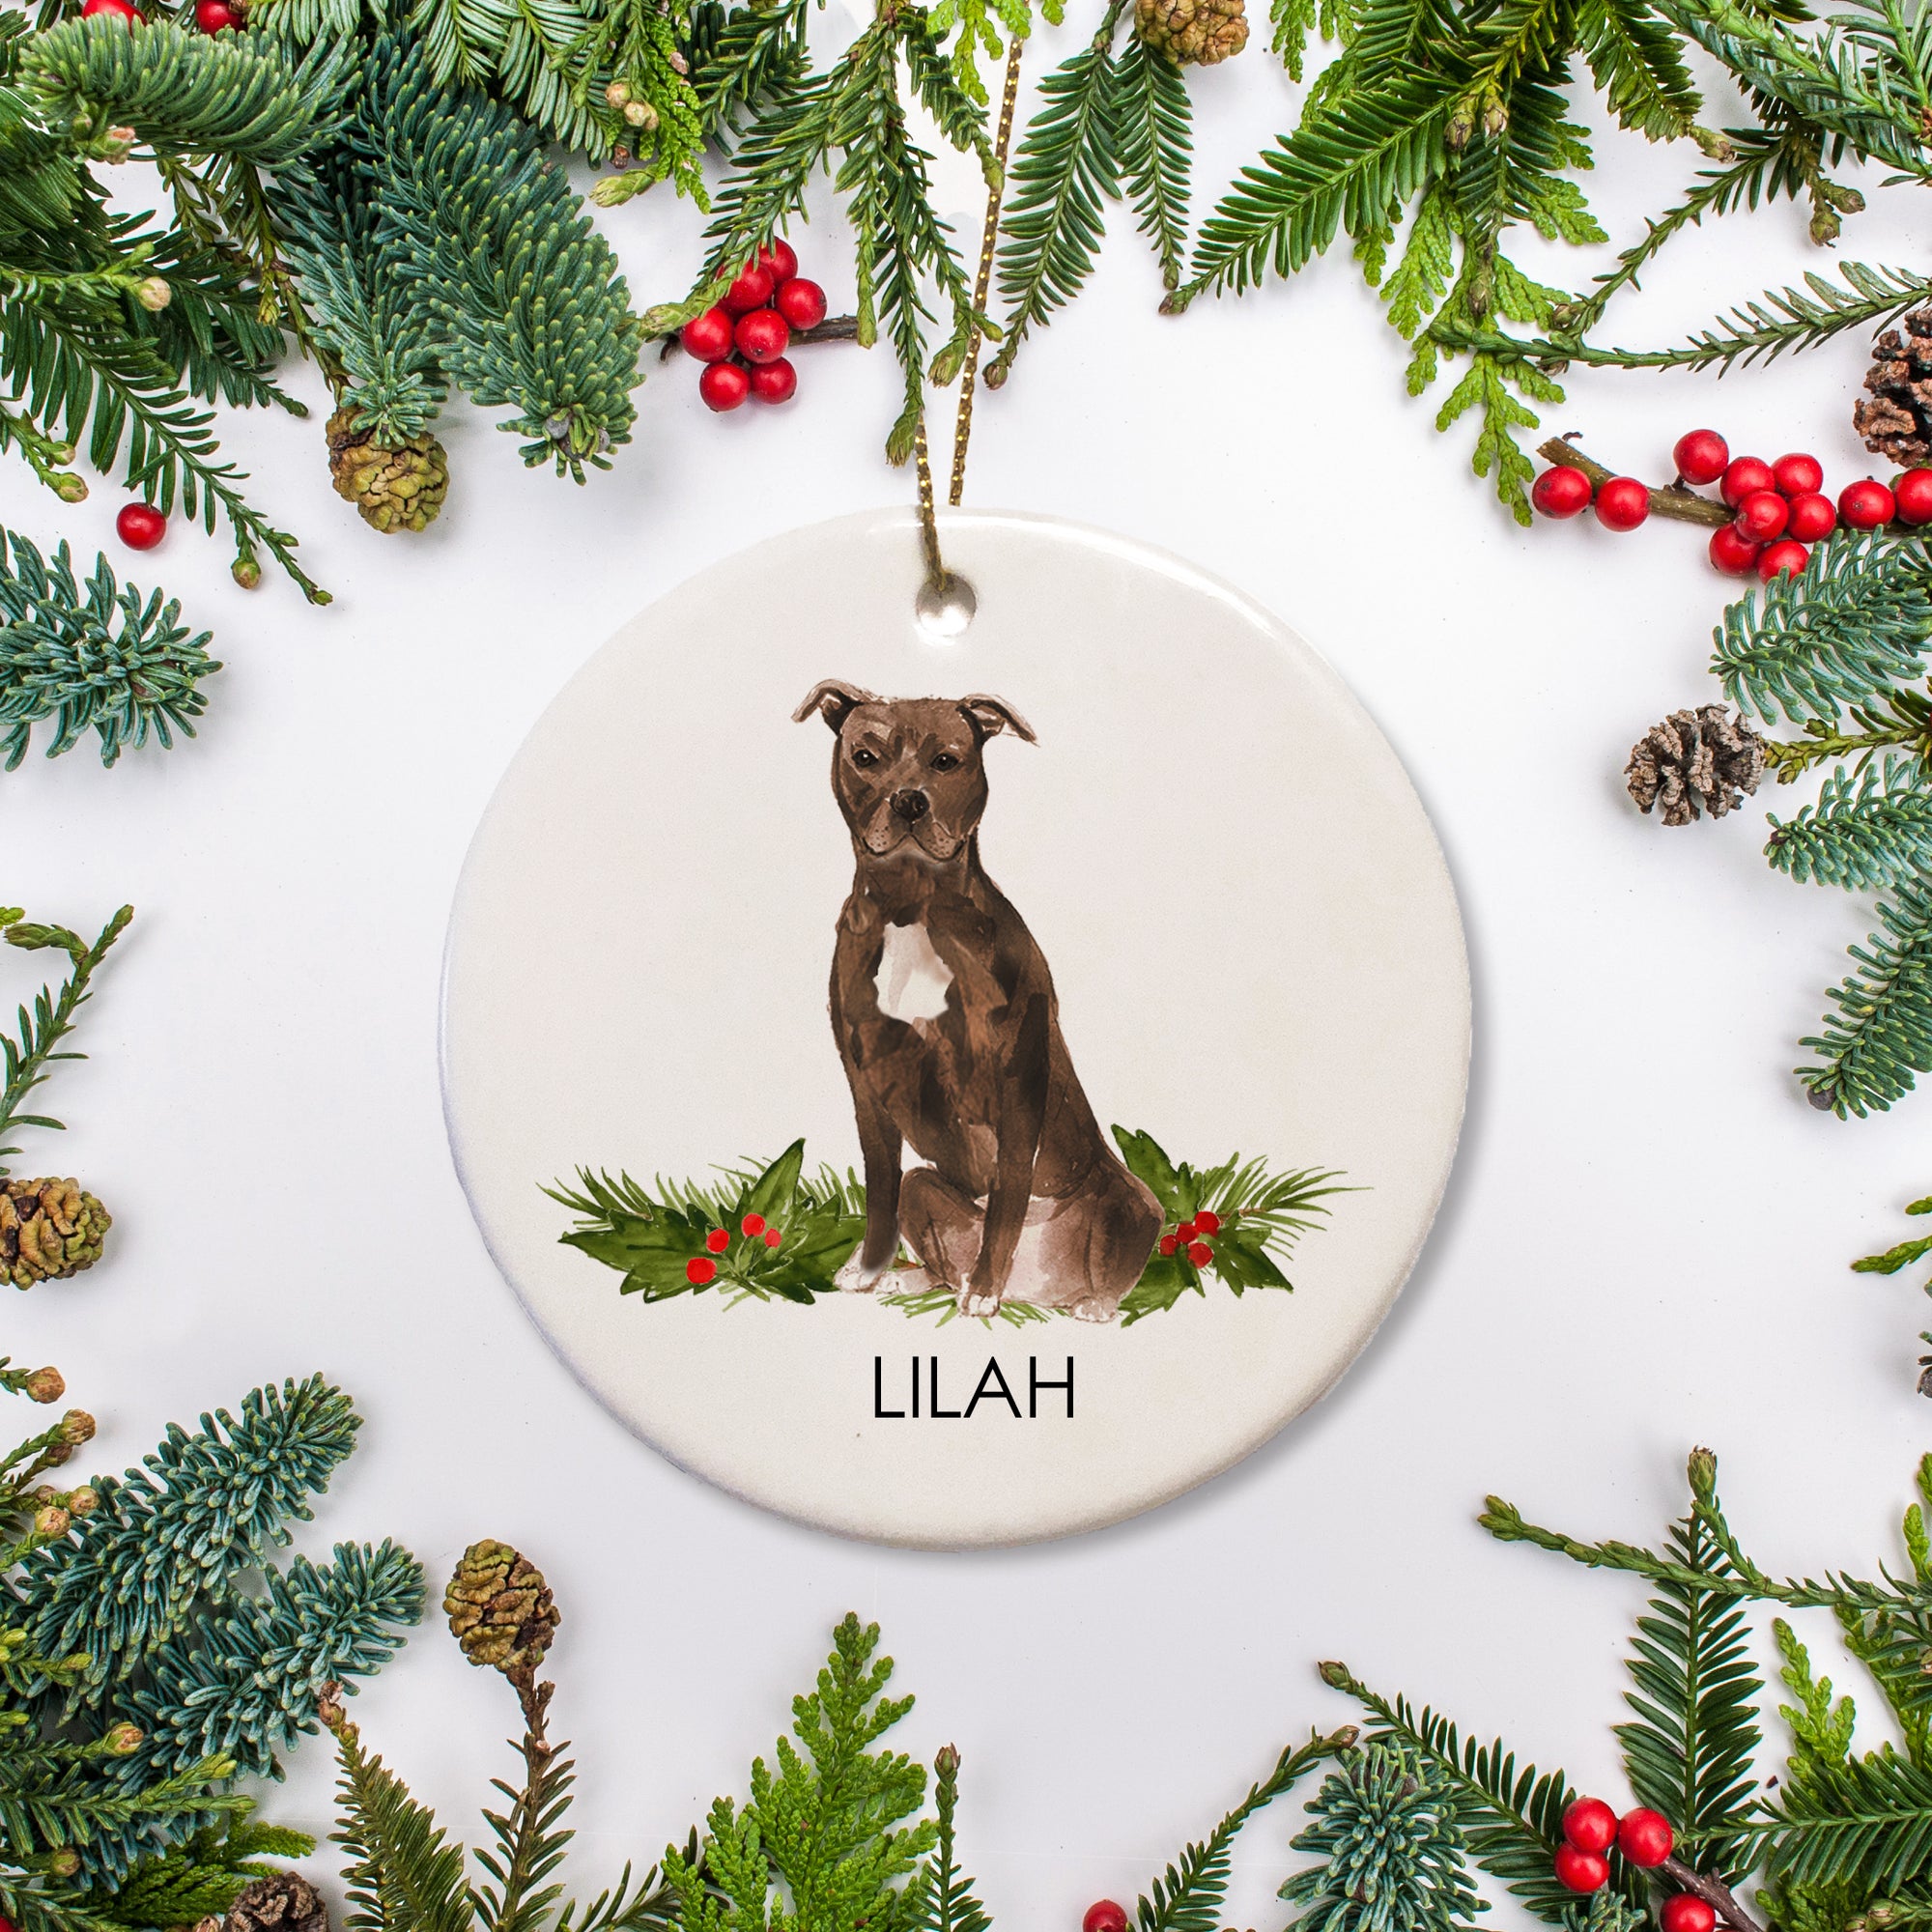 Pitbull Christmas Ornament personalized with your pit bull's name, brown pitty dog with a white chest